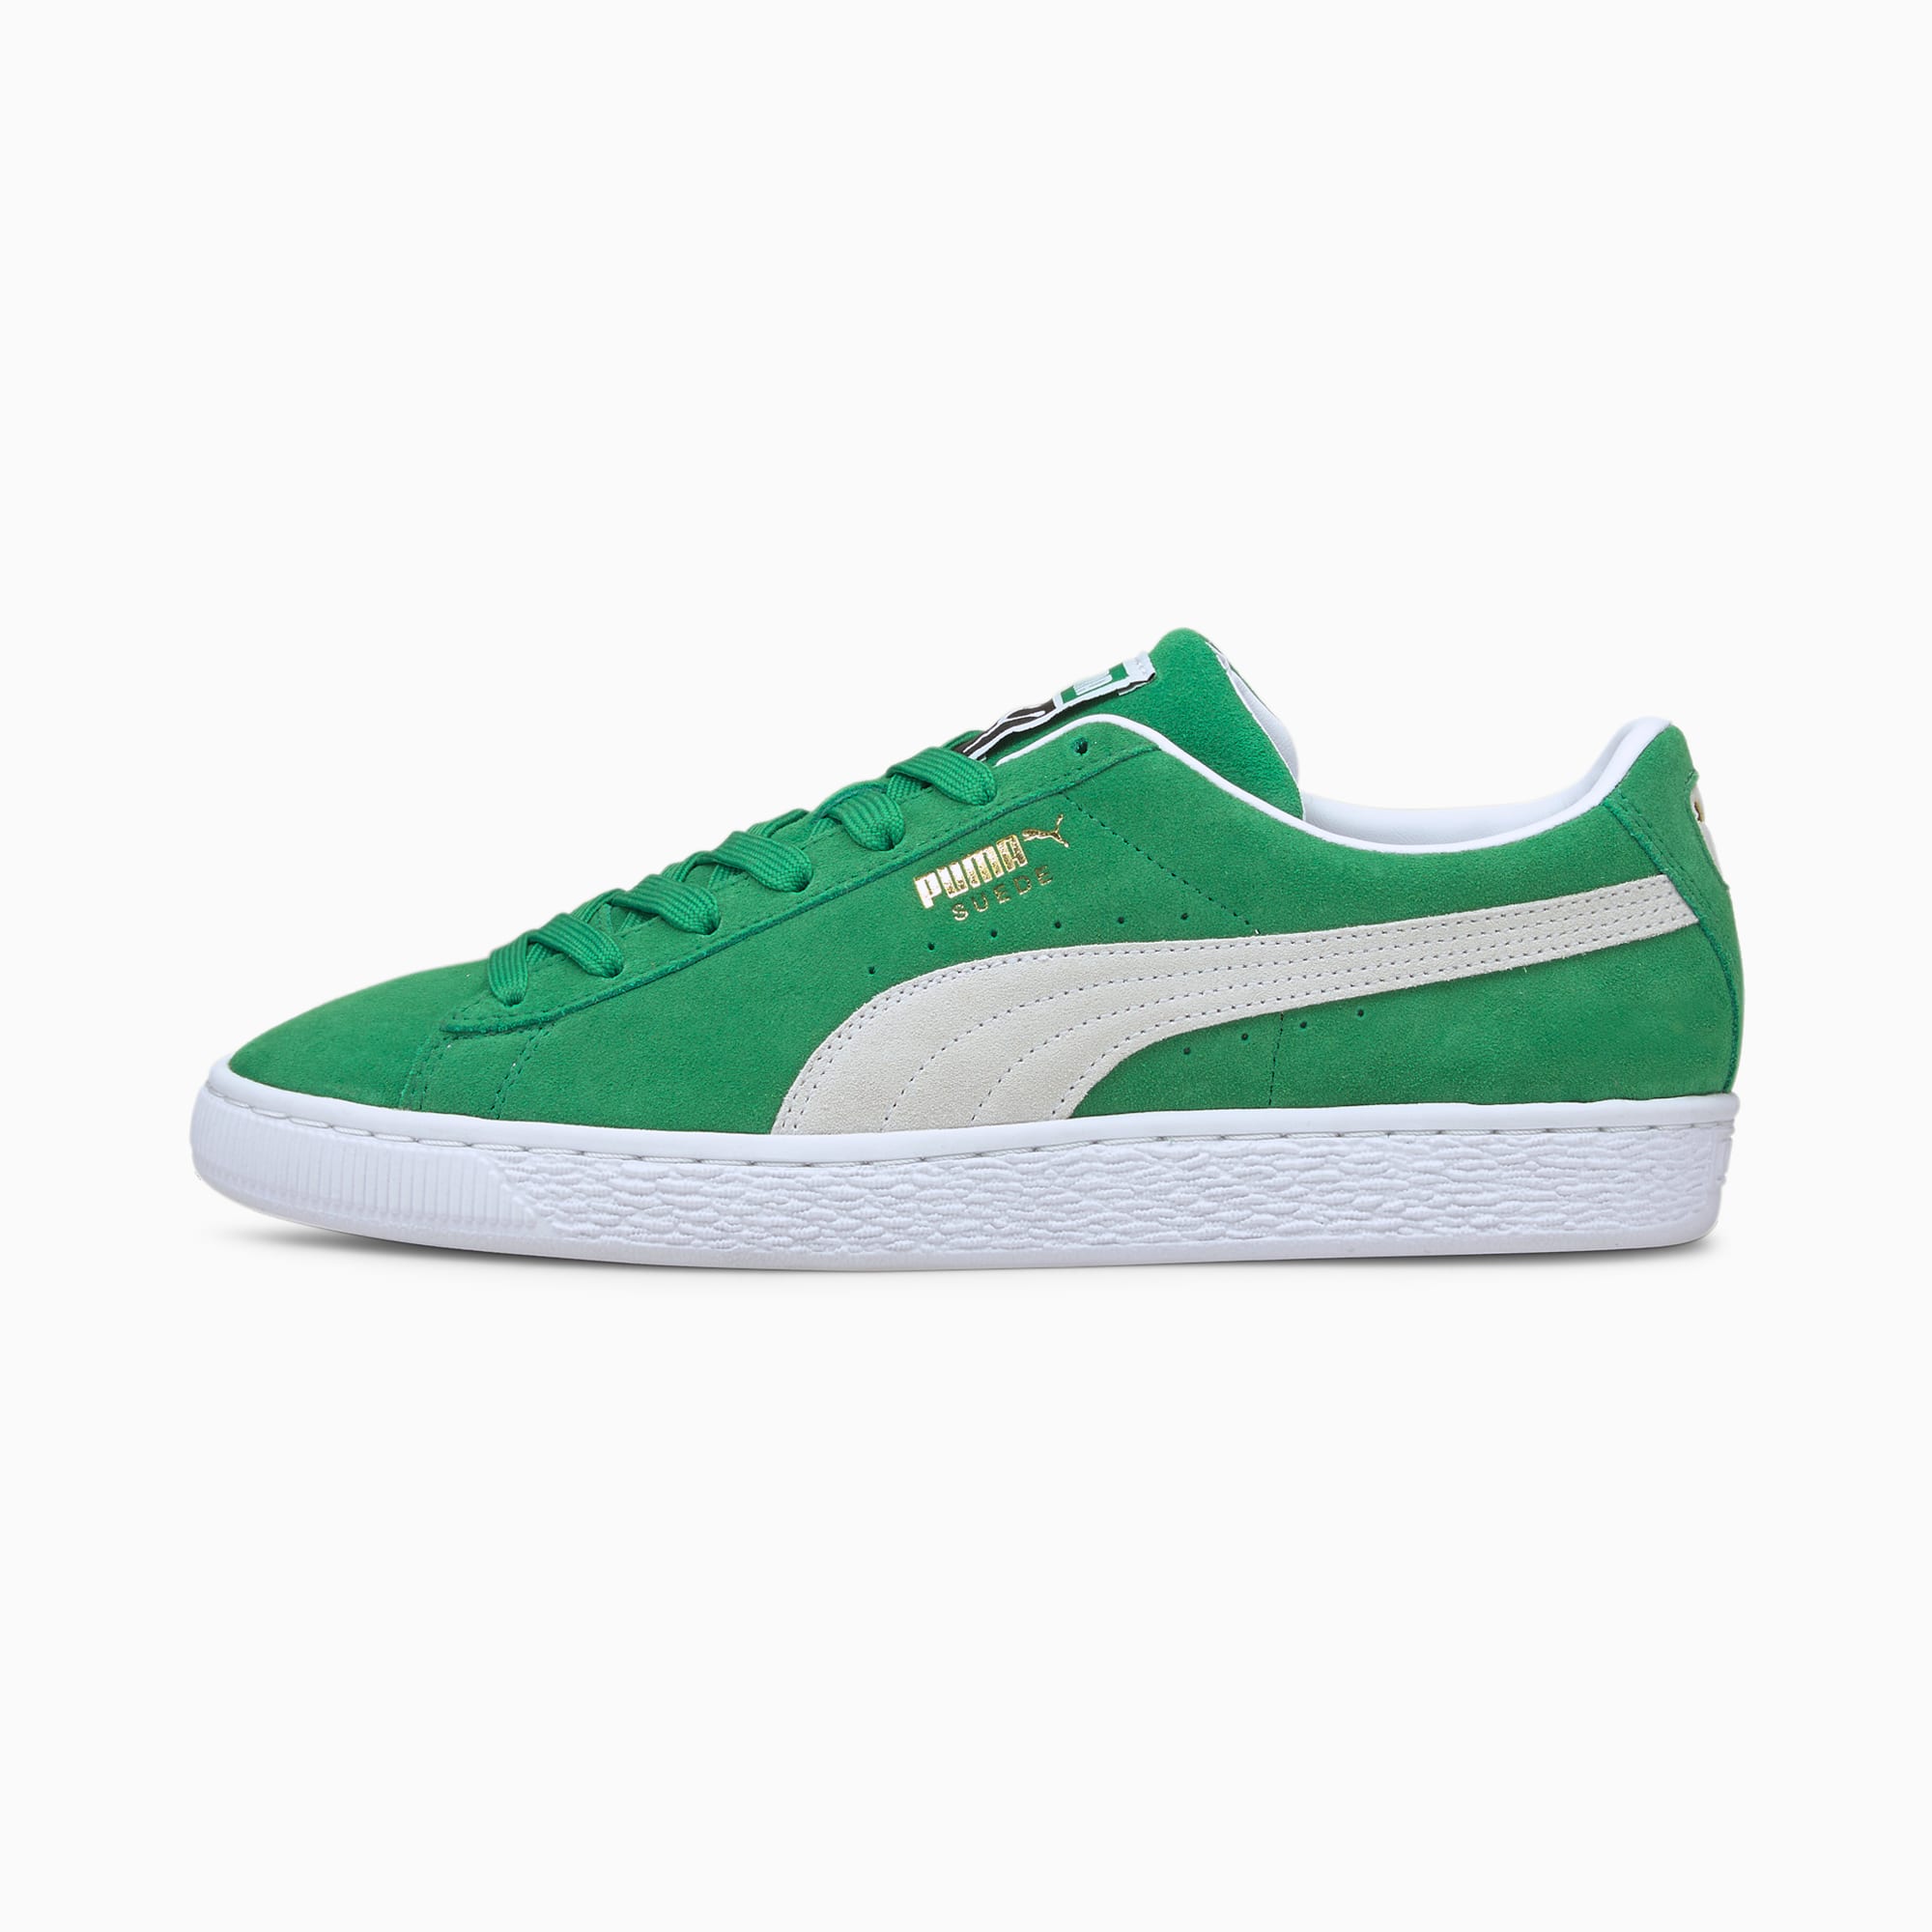 green and white pumas, great trade off 69% - research.sjp.ac.lk